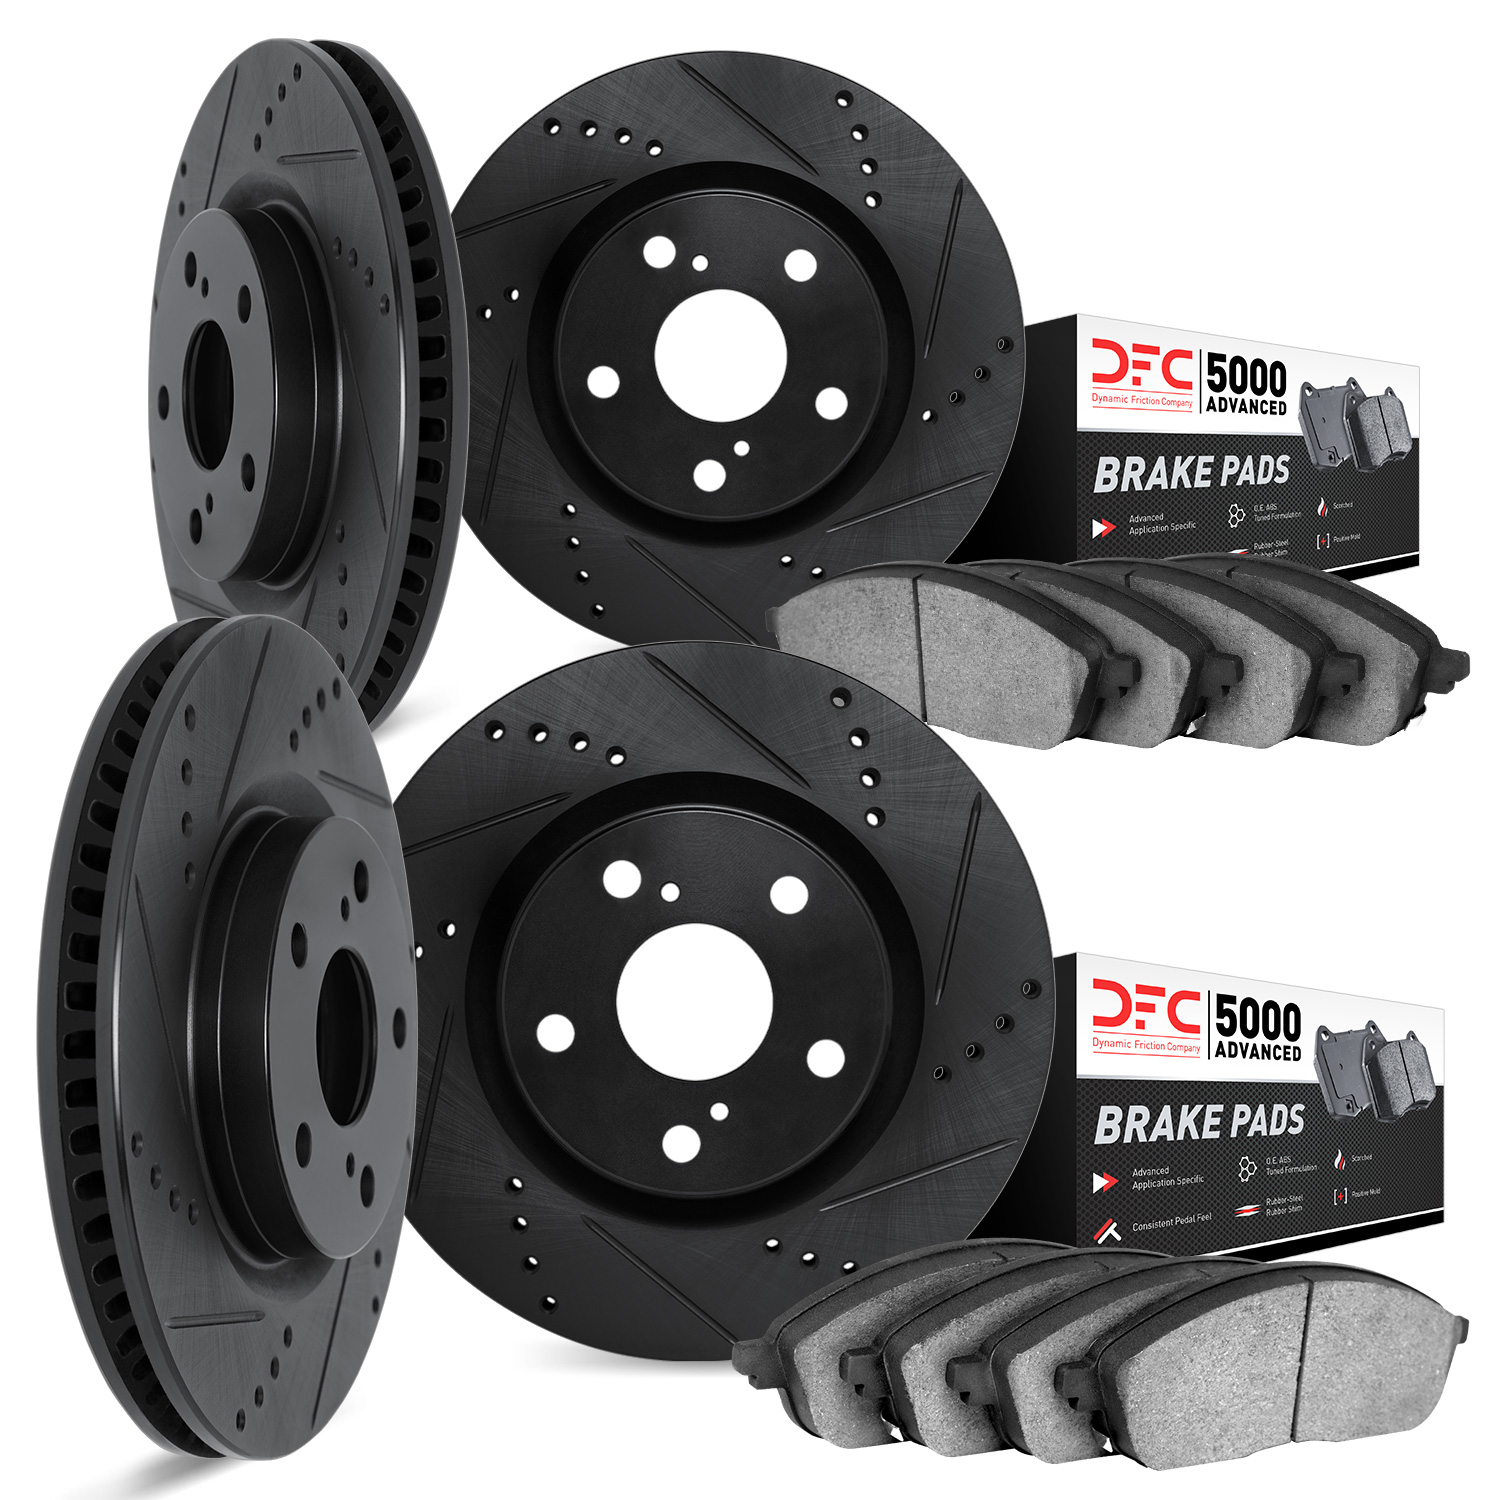 8504-02029 Drilled/Slotted Brake Rotors w/5000 Advanced Brake Pads Kit [Black], 2014-2019 Porsche, Position: Front and Rear